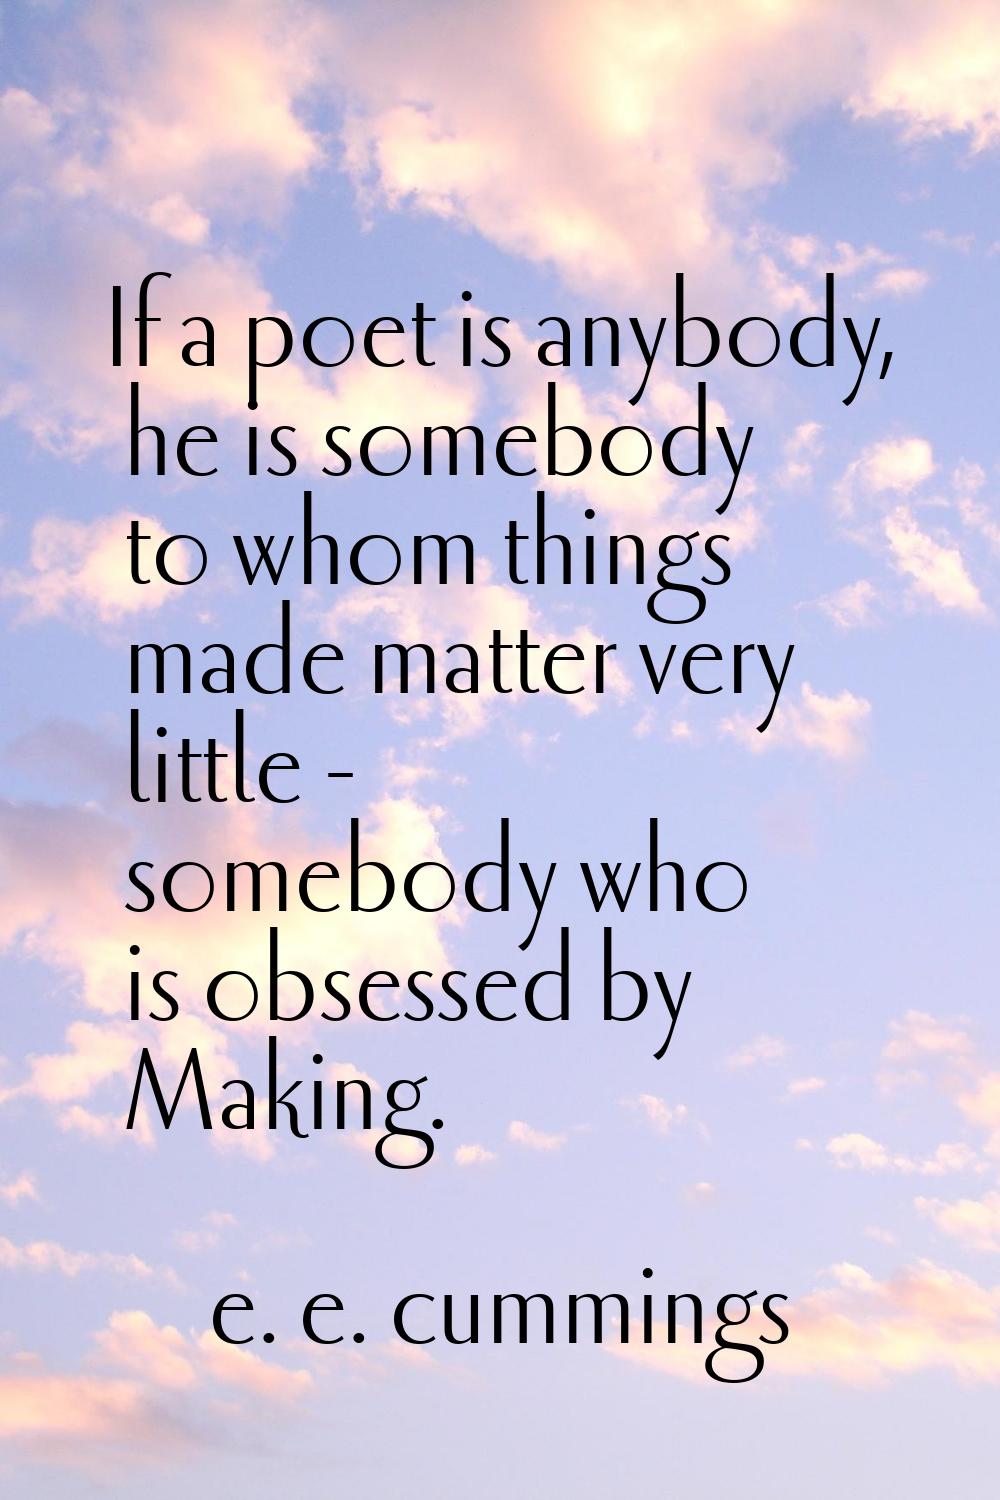 If a poet is anybody, he is somebody to whom things made matter very little - somebody who is obses